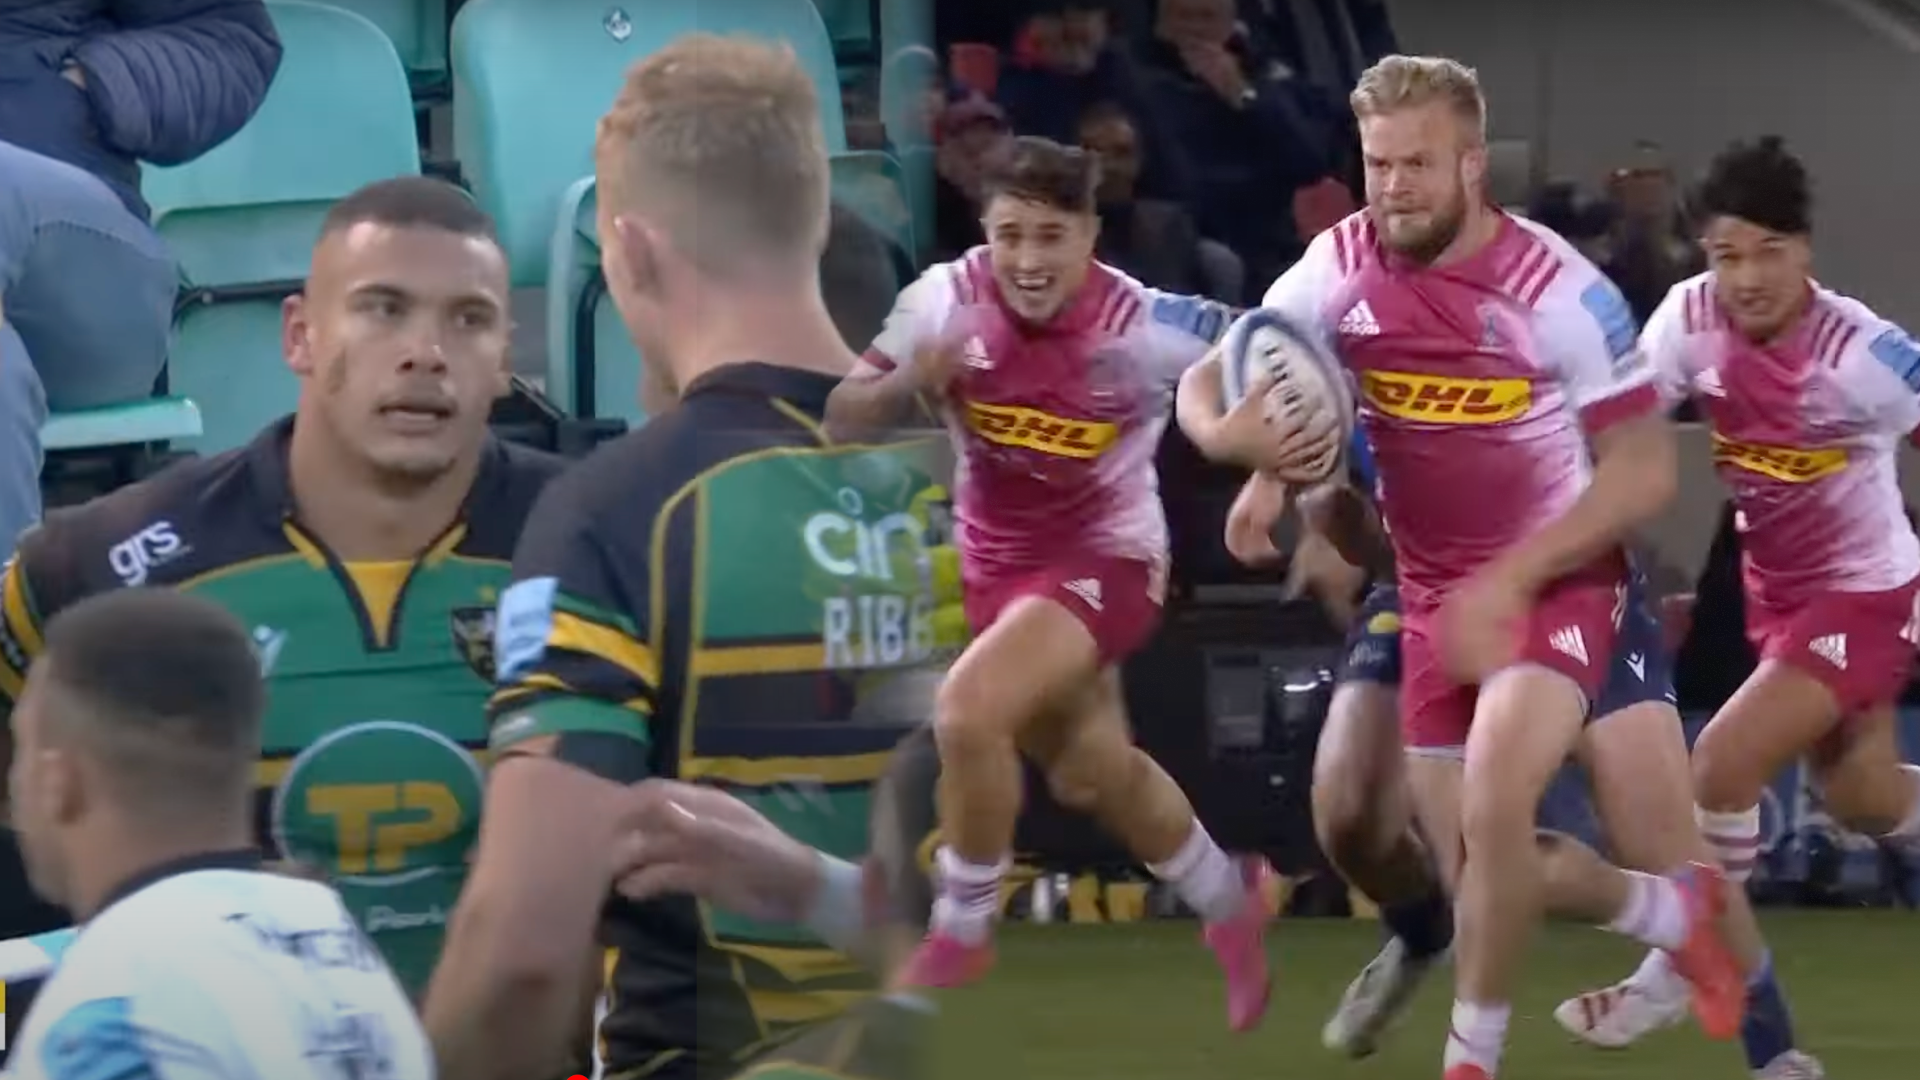 Uncapped South African XV playing in the Premiership